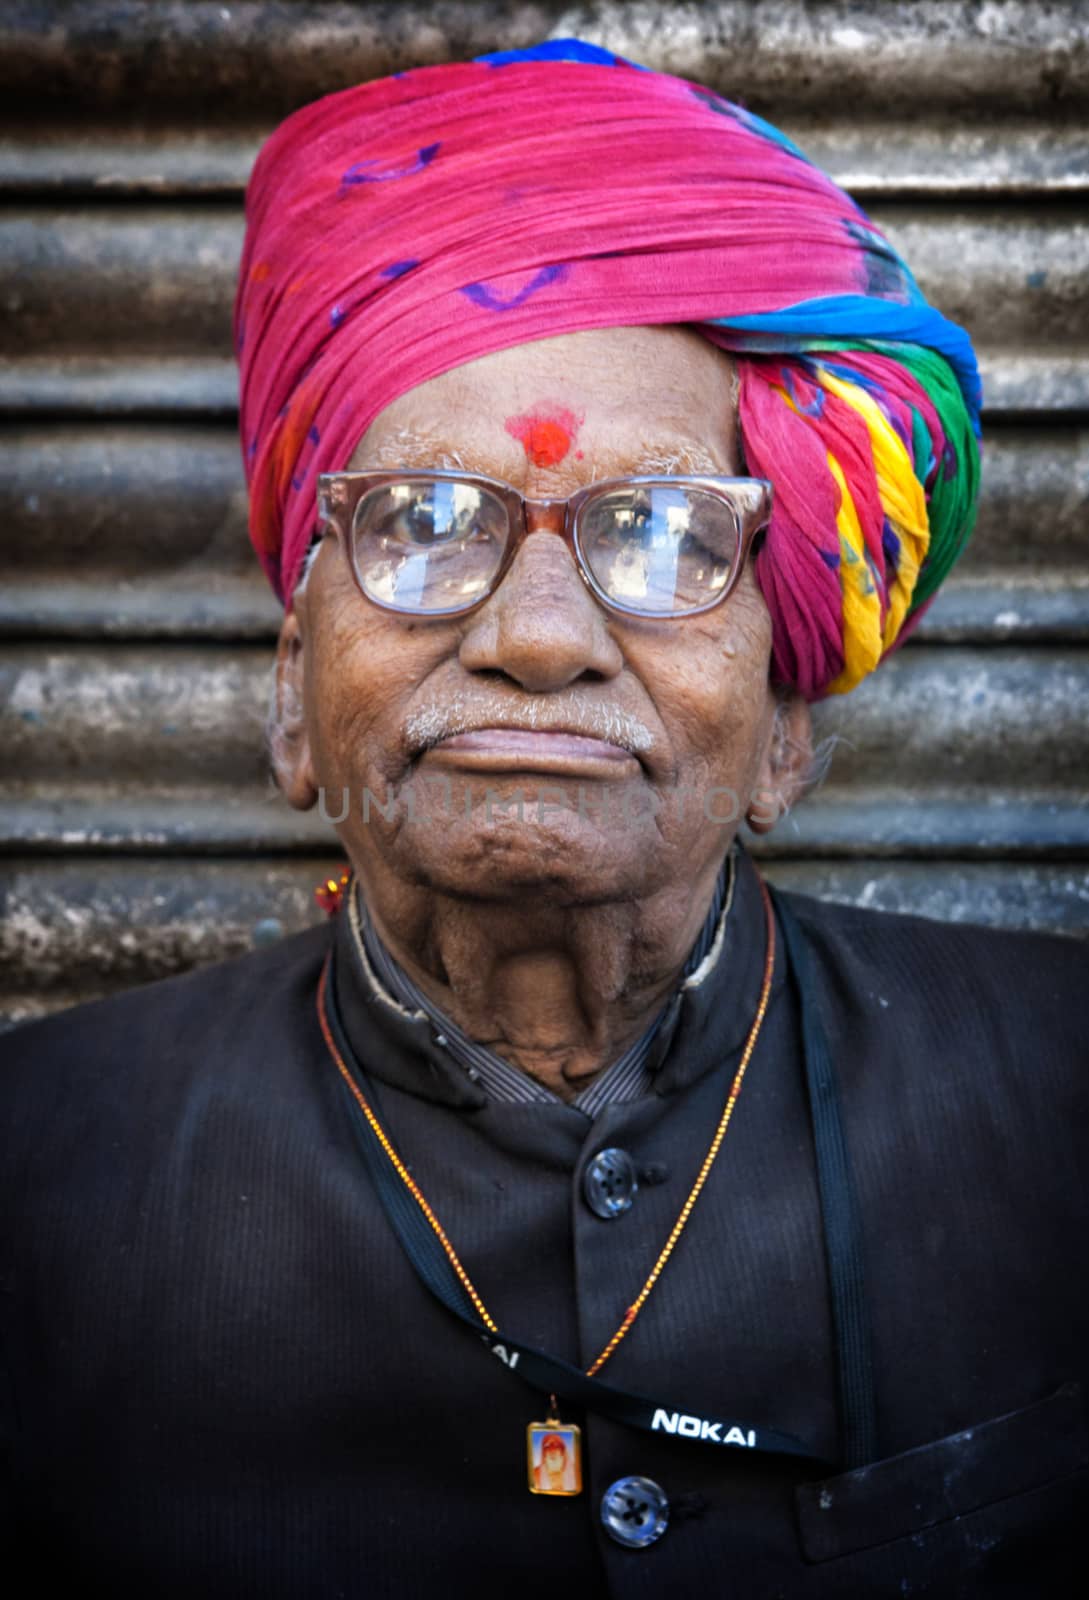 JODHPUR, INDIA - FEBRUARY 27, 2013: Undefined indian man in colourful turban by johnnychaos